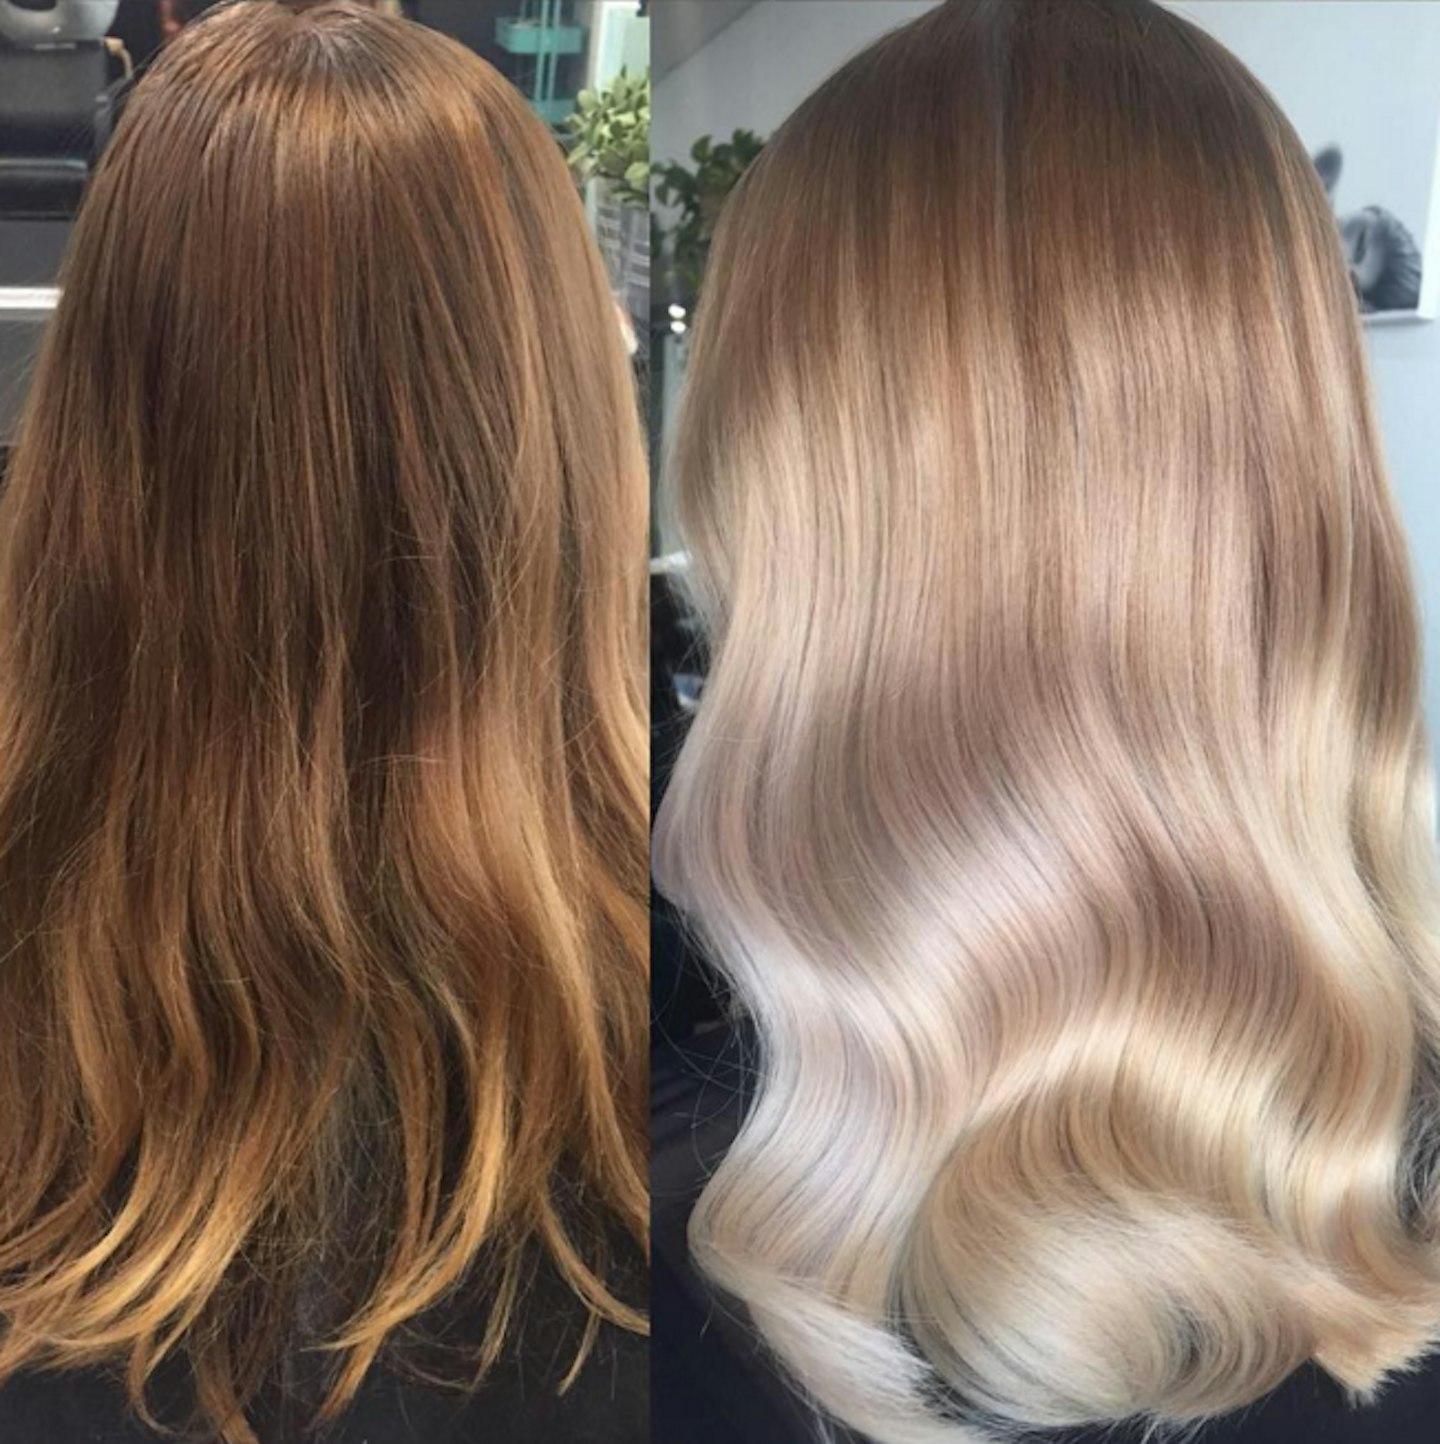 olaplex before and after